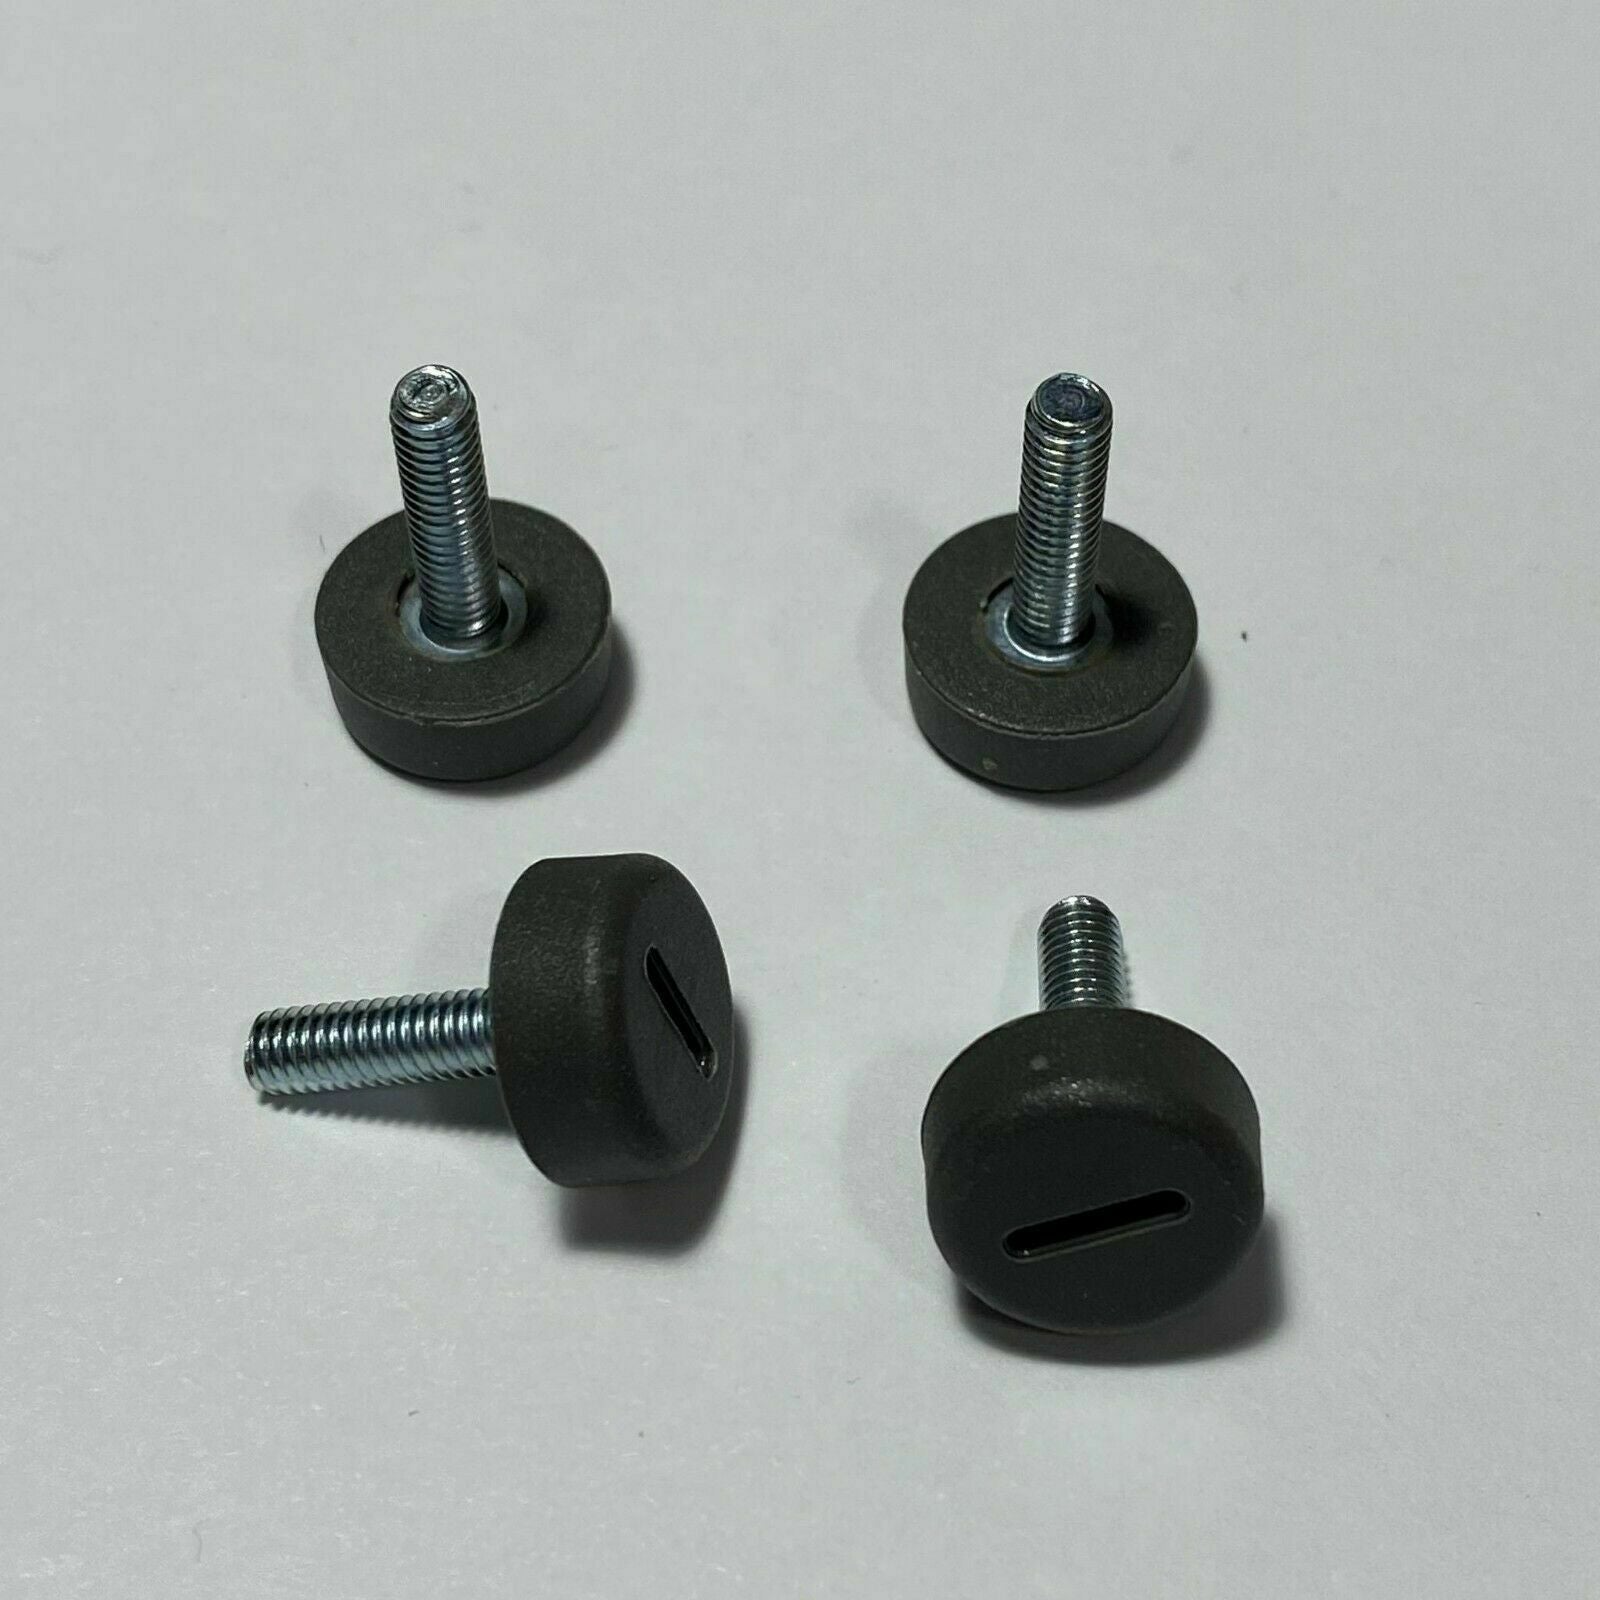 IKEA Screw Part # 153312 For SKADIS Pegboard Gray (4 pack) Replacement Fittings